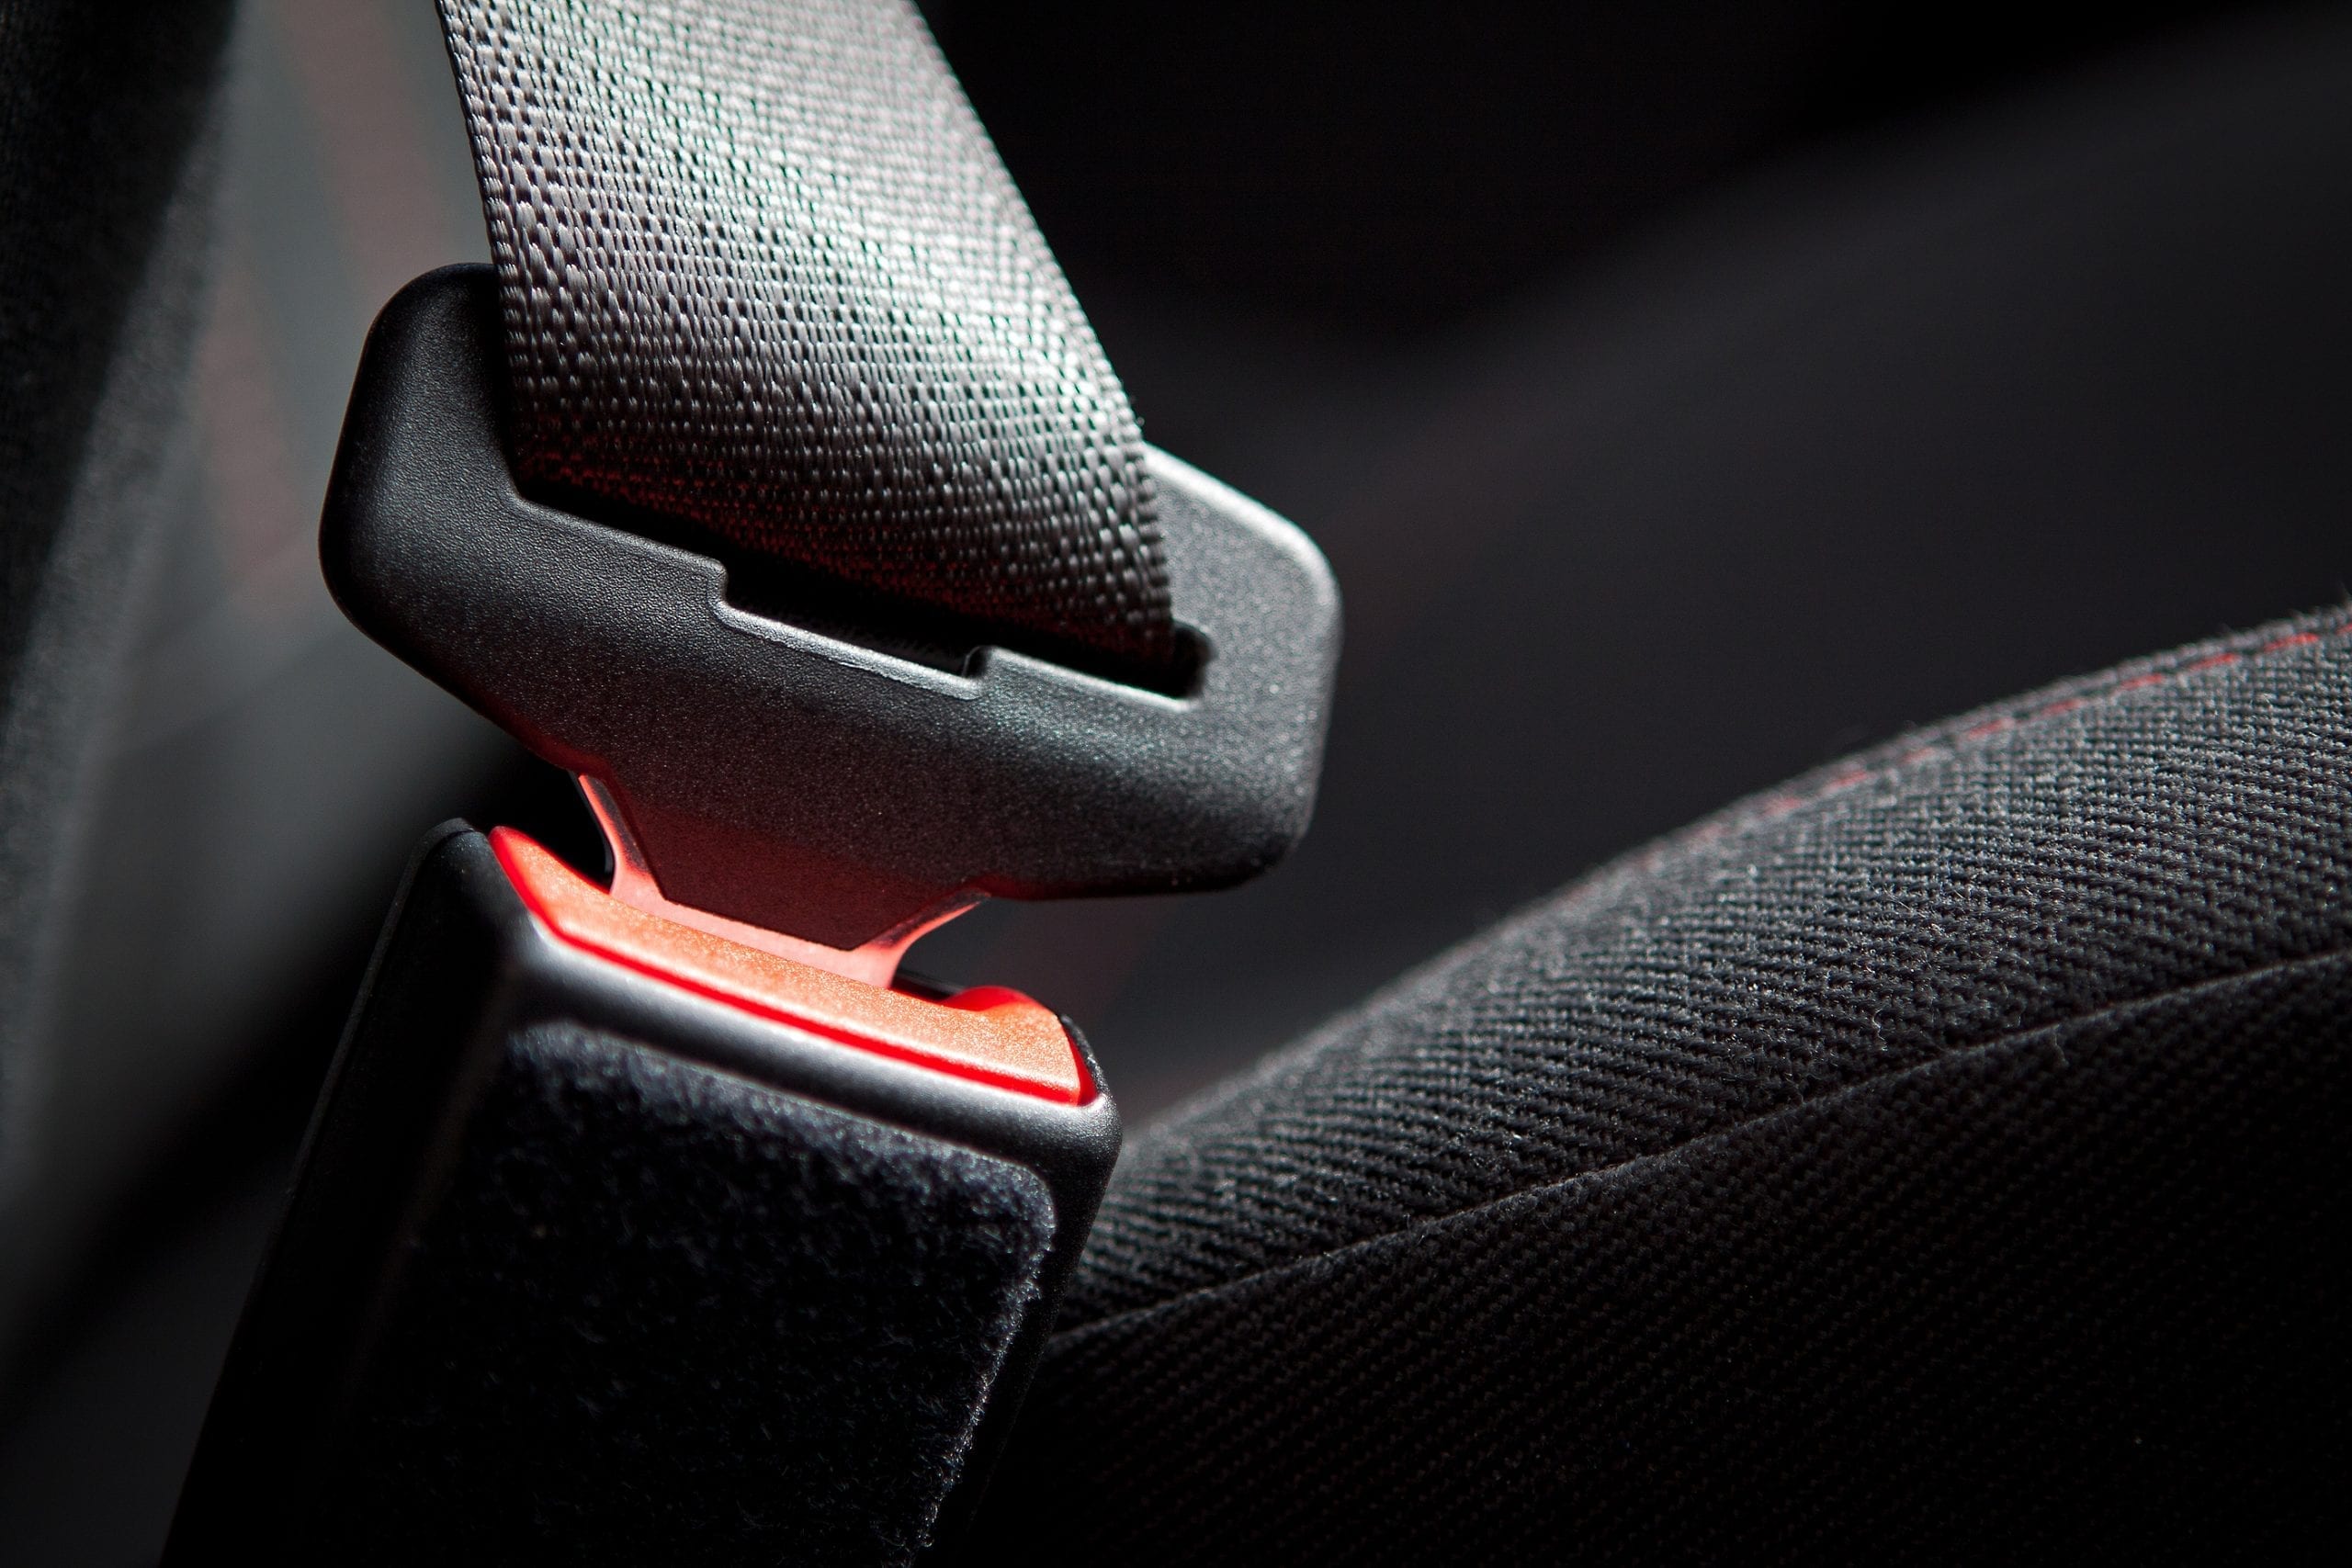 Chevrolet and GMC Recall Vehicles for Defective Seatbelts